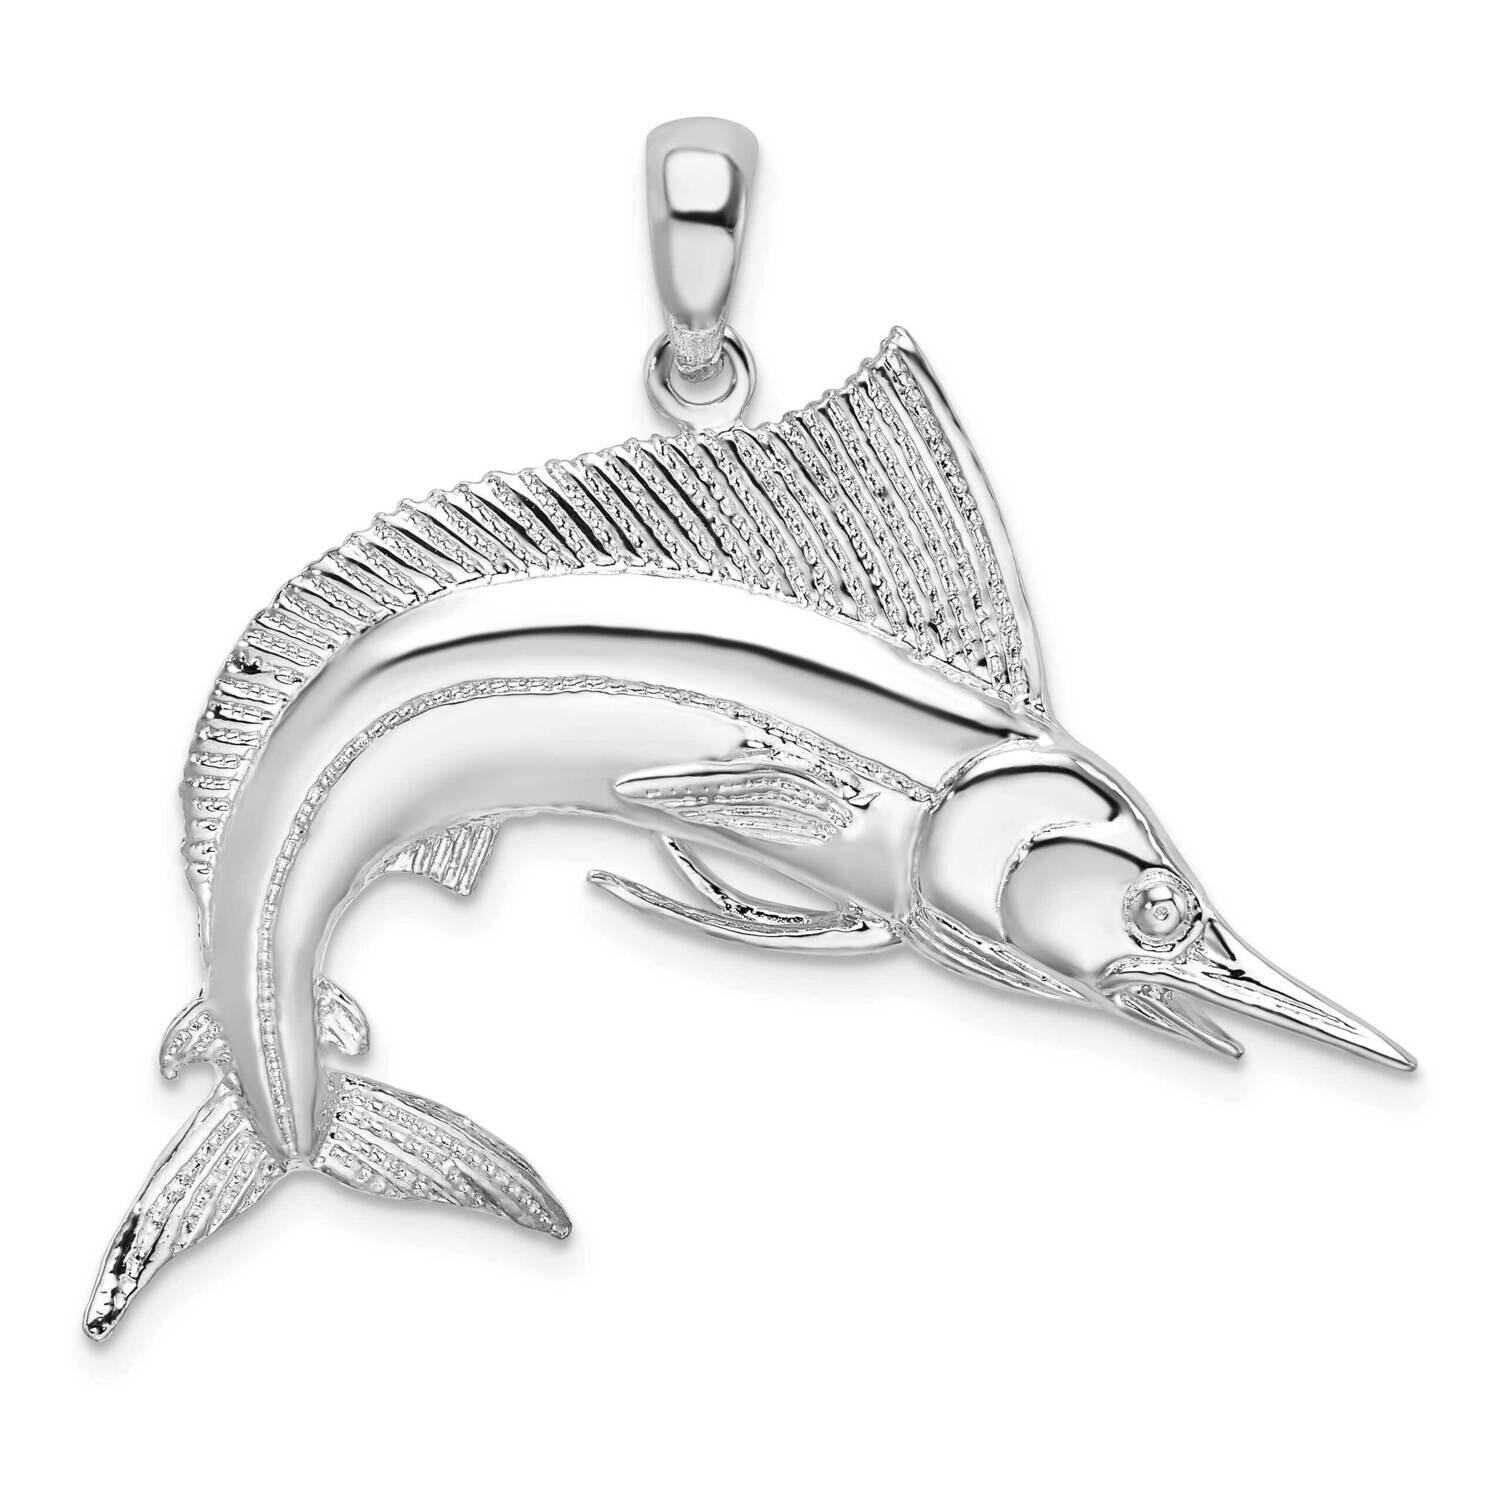 Satin Striped Marlin Pendant Sterling Silver Polished QC10144